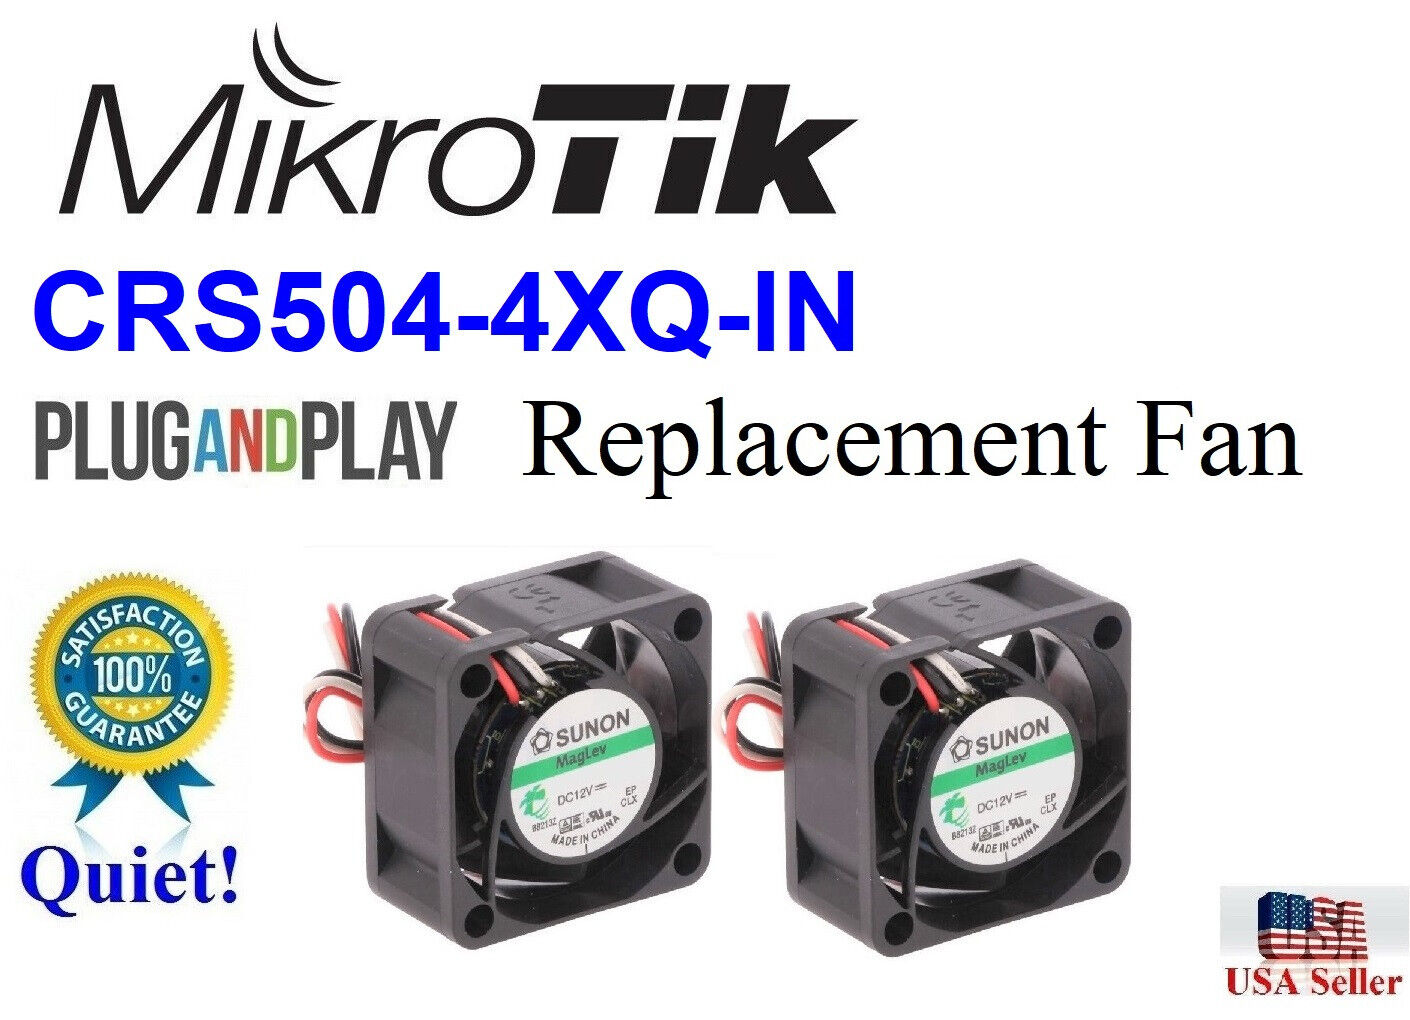 2x Quiet Version Replacement Fans for MikroTik CRS504-4XQ-IN